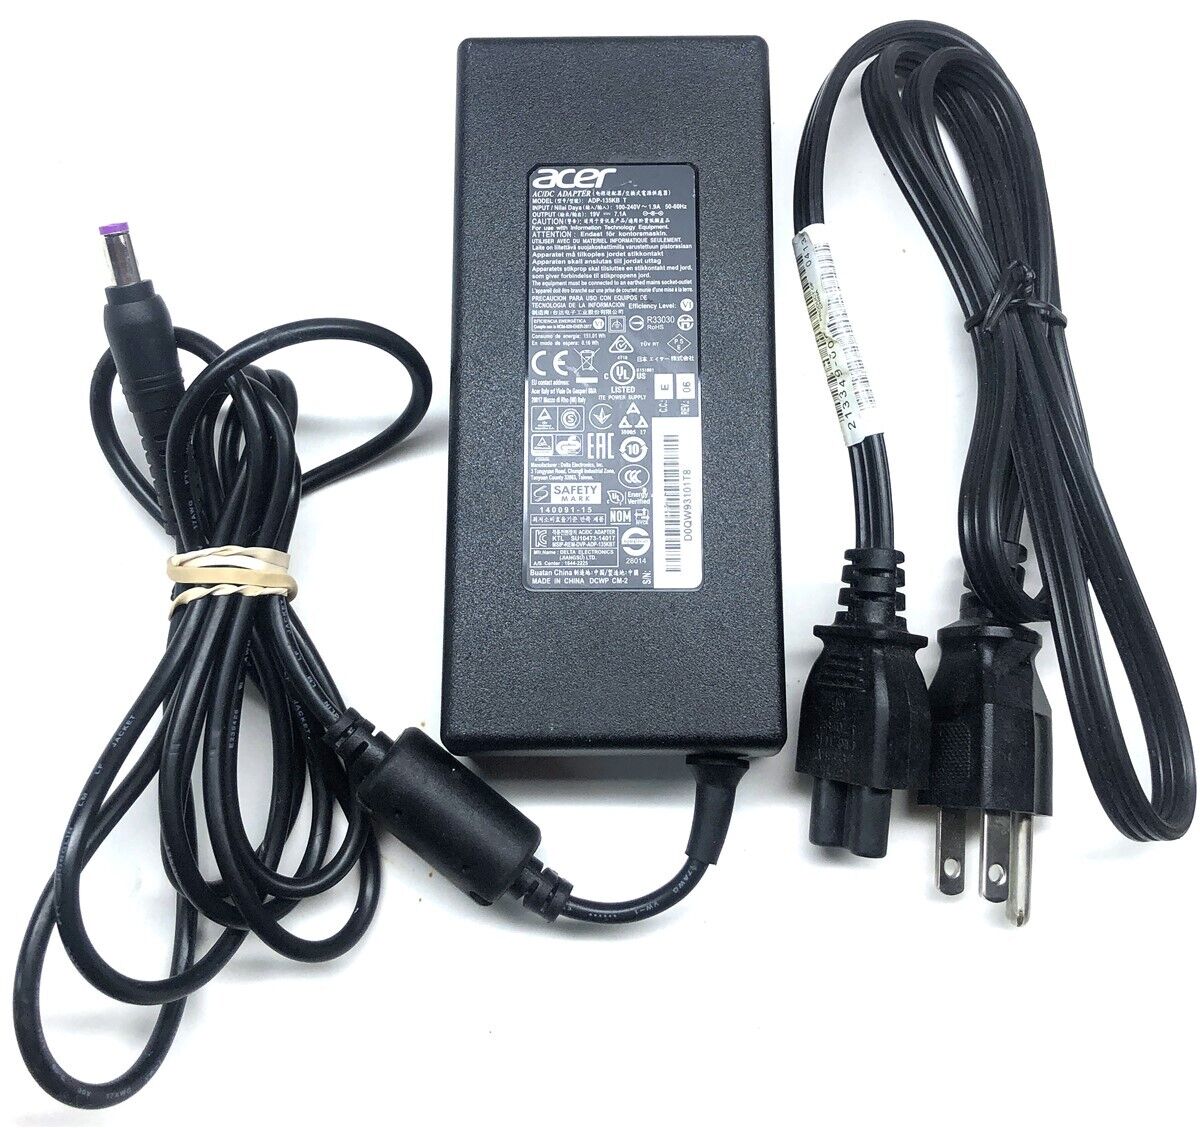 Genuine Acer Laptop Charger AC Adapter Power Supply ADP-135KB T 19V 7.1A 135W 